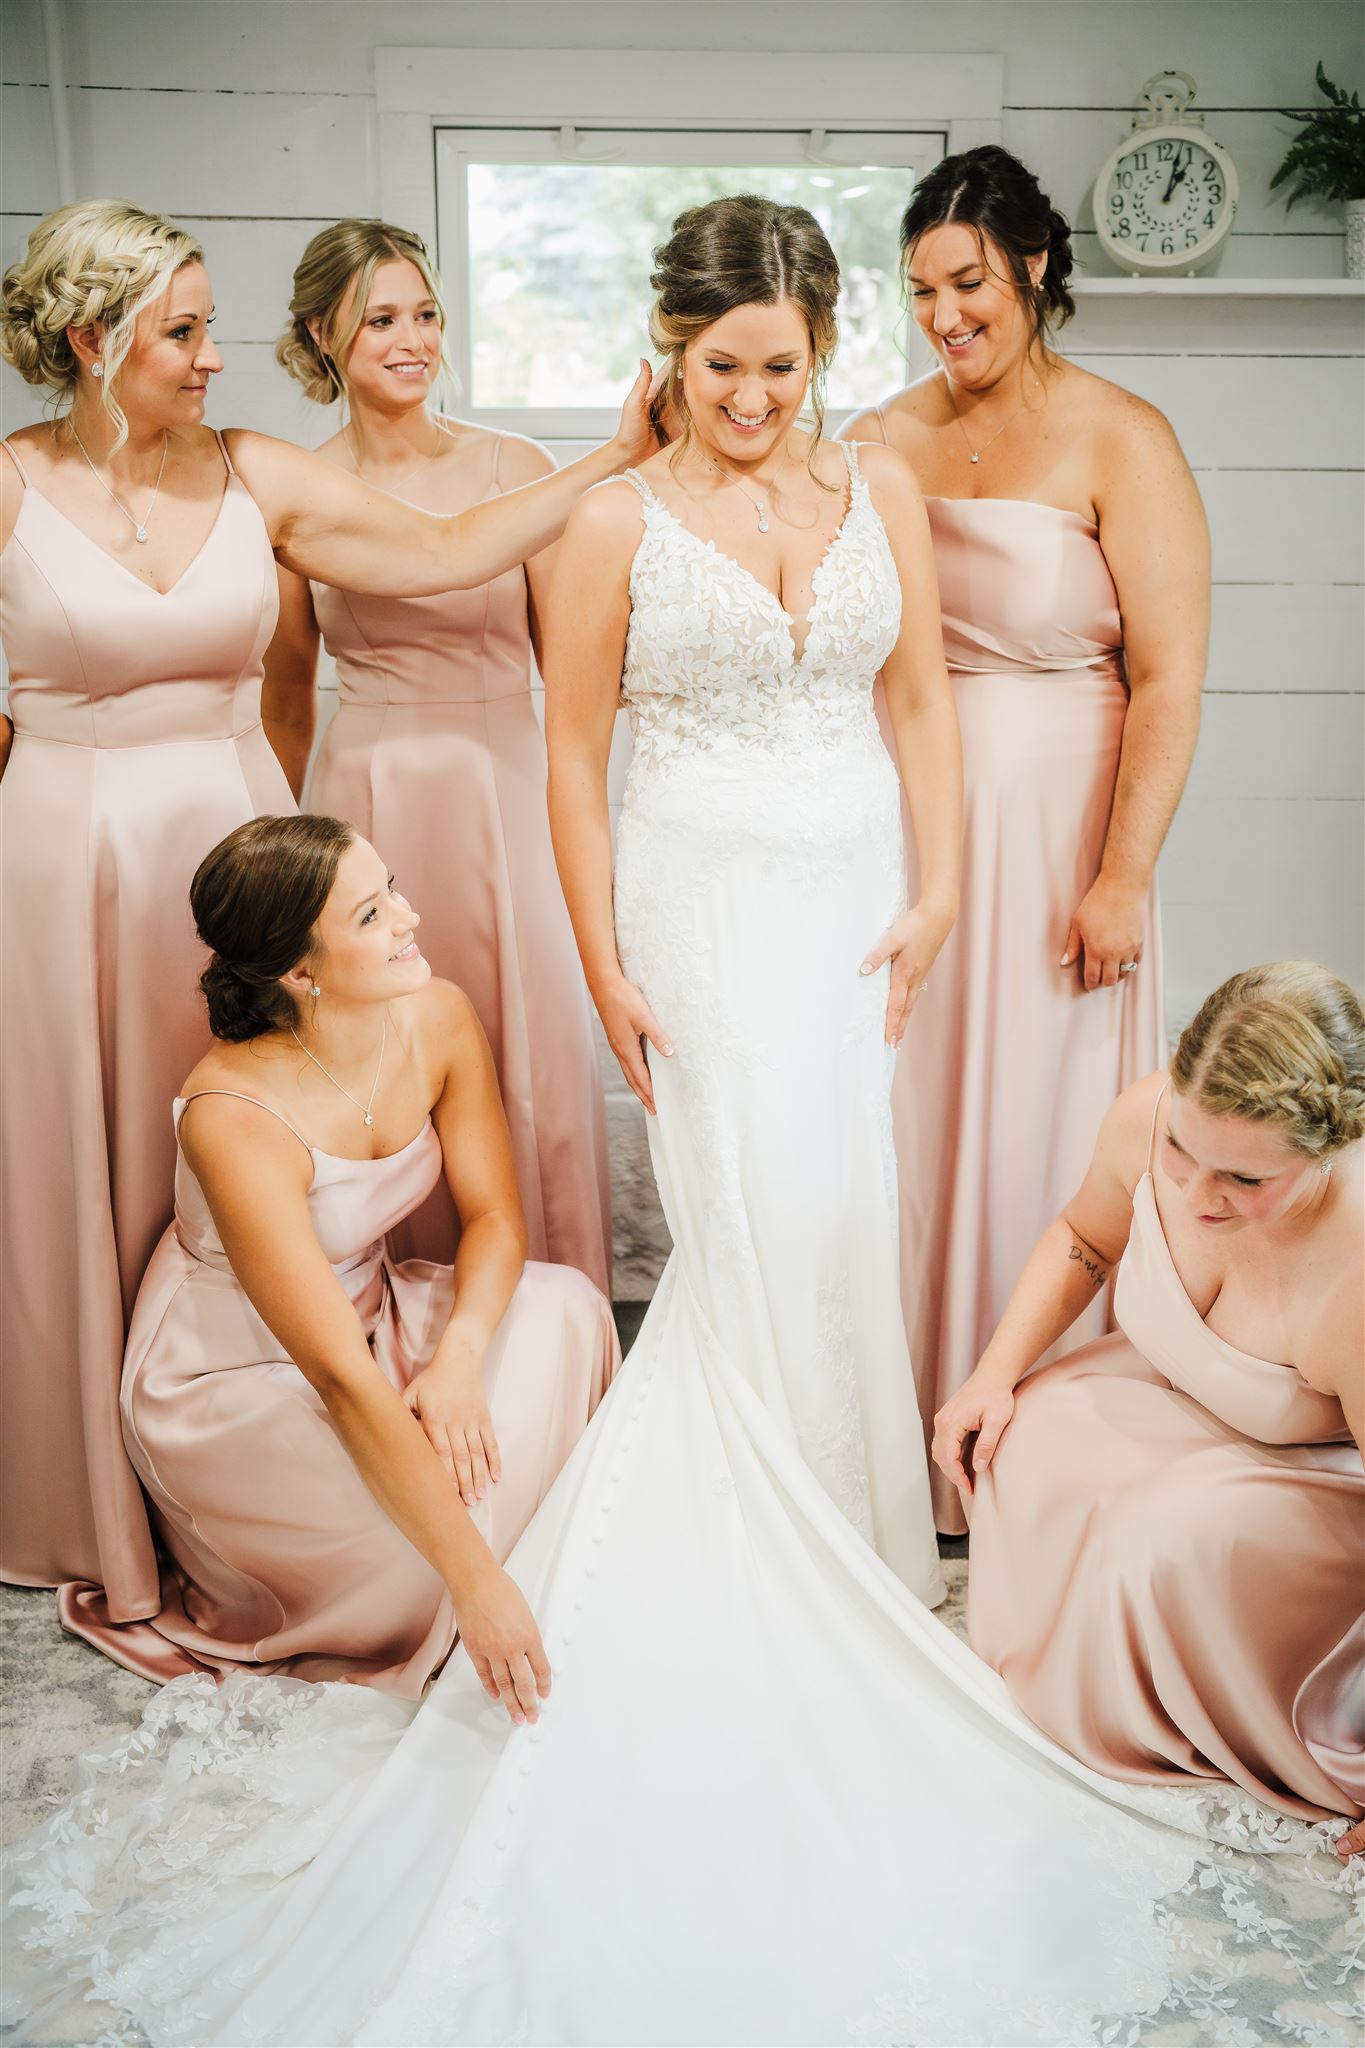 I love to get a photo of the bride getting ready for her wedding day with her bridesmaids fawning over her. Blush pink wedding Bridesmaids photo Getting ready photos #weddinginspiration #weddingplanning #diywedding #wisconsinweddingphotographer #armywedding